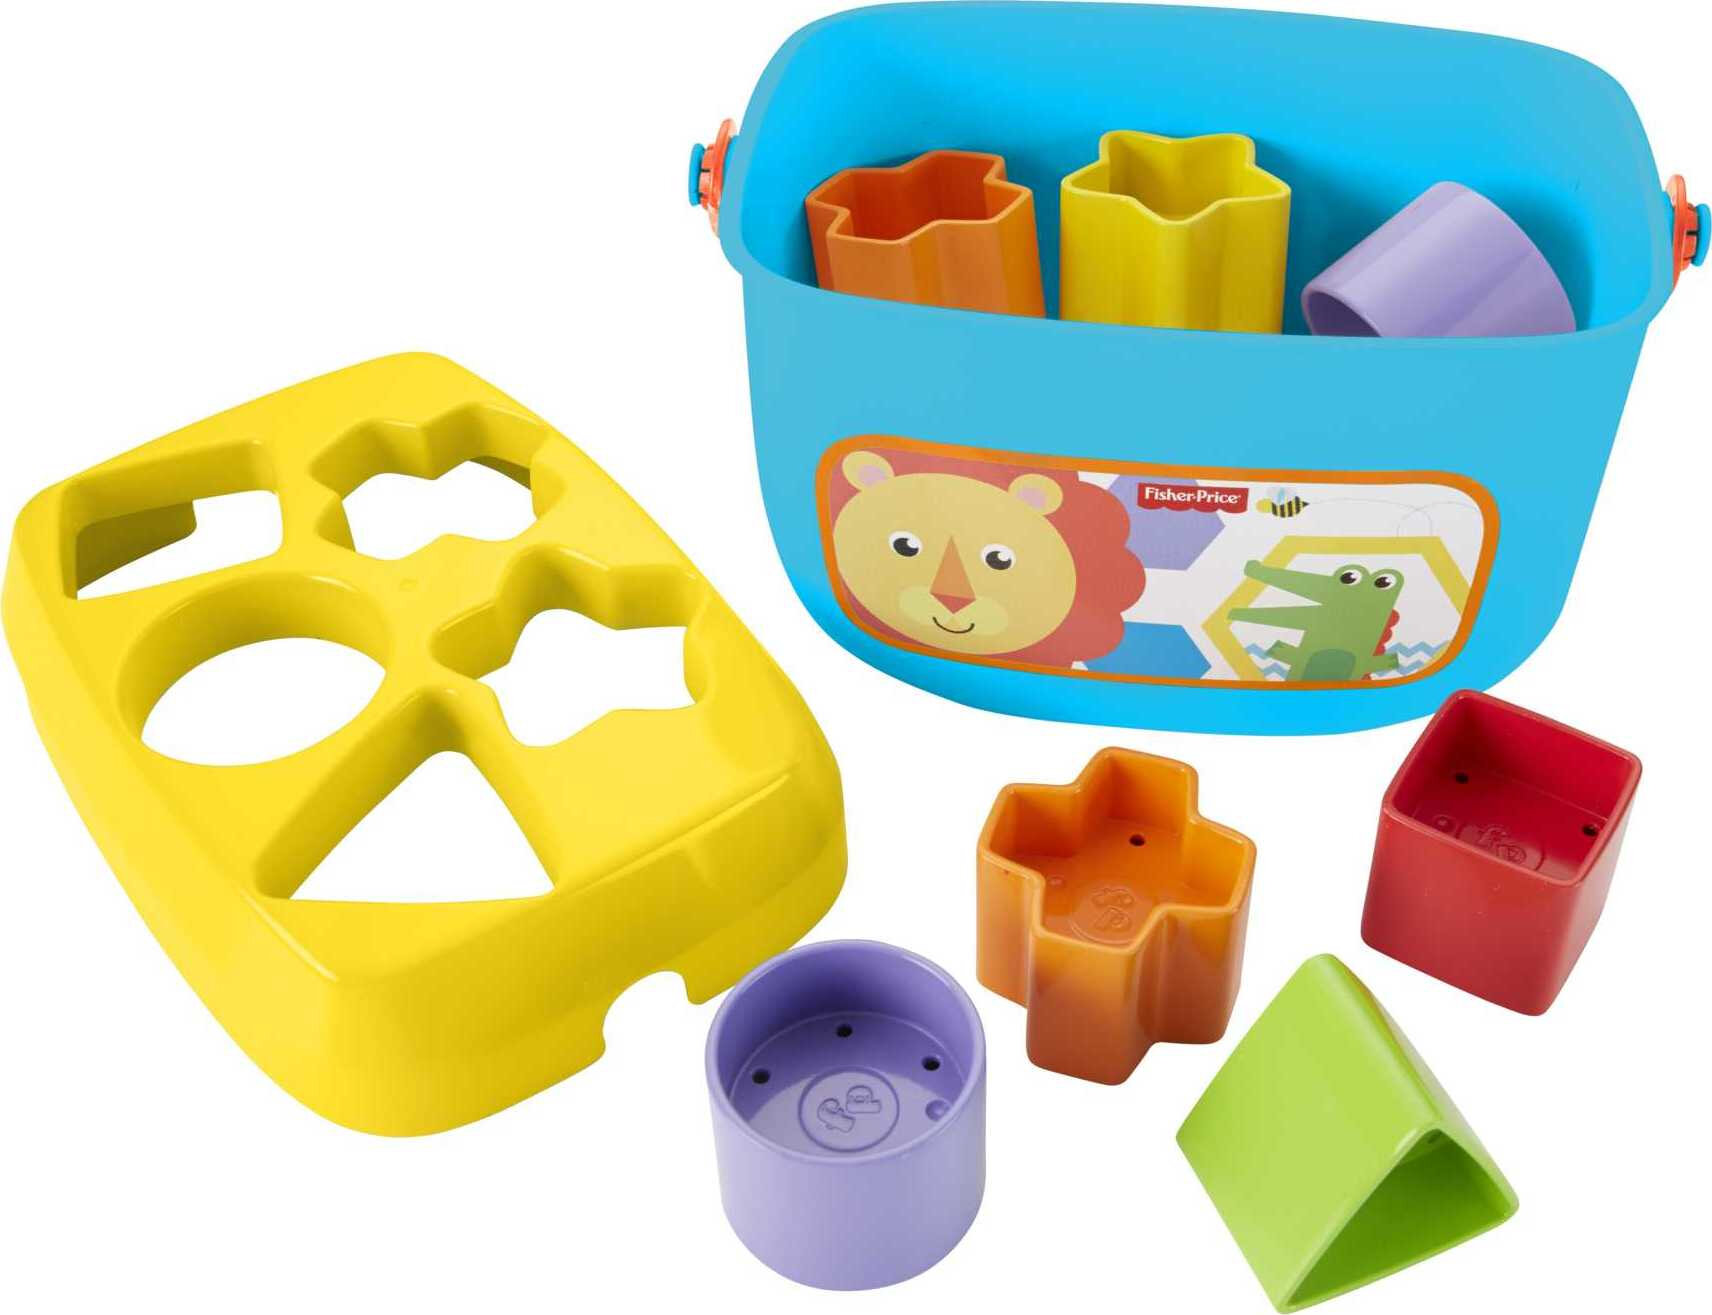 Fisher-Price Baby’s First Blocks Shape-Sorting Toy, Set of 10, for Infants 6+ Months - image 5 of 7